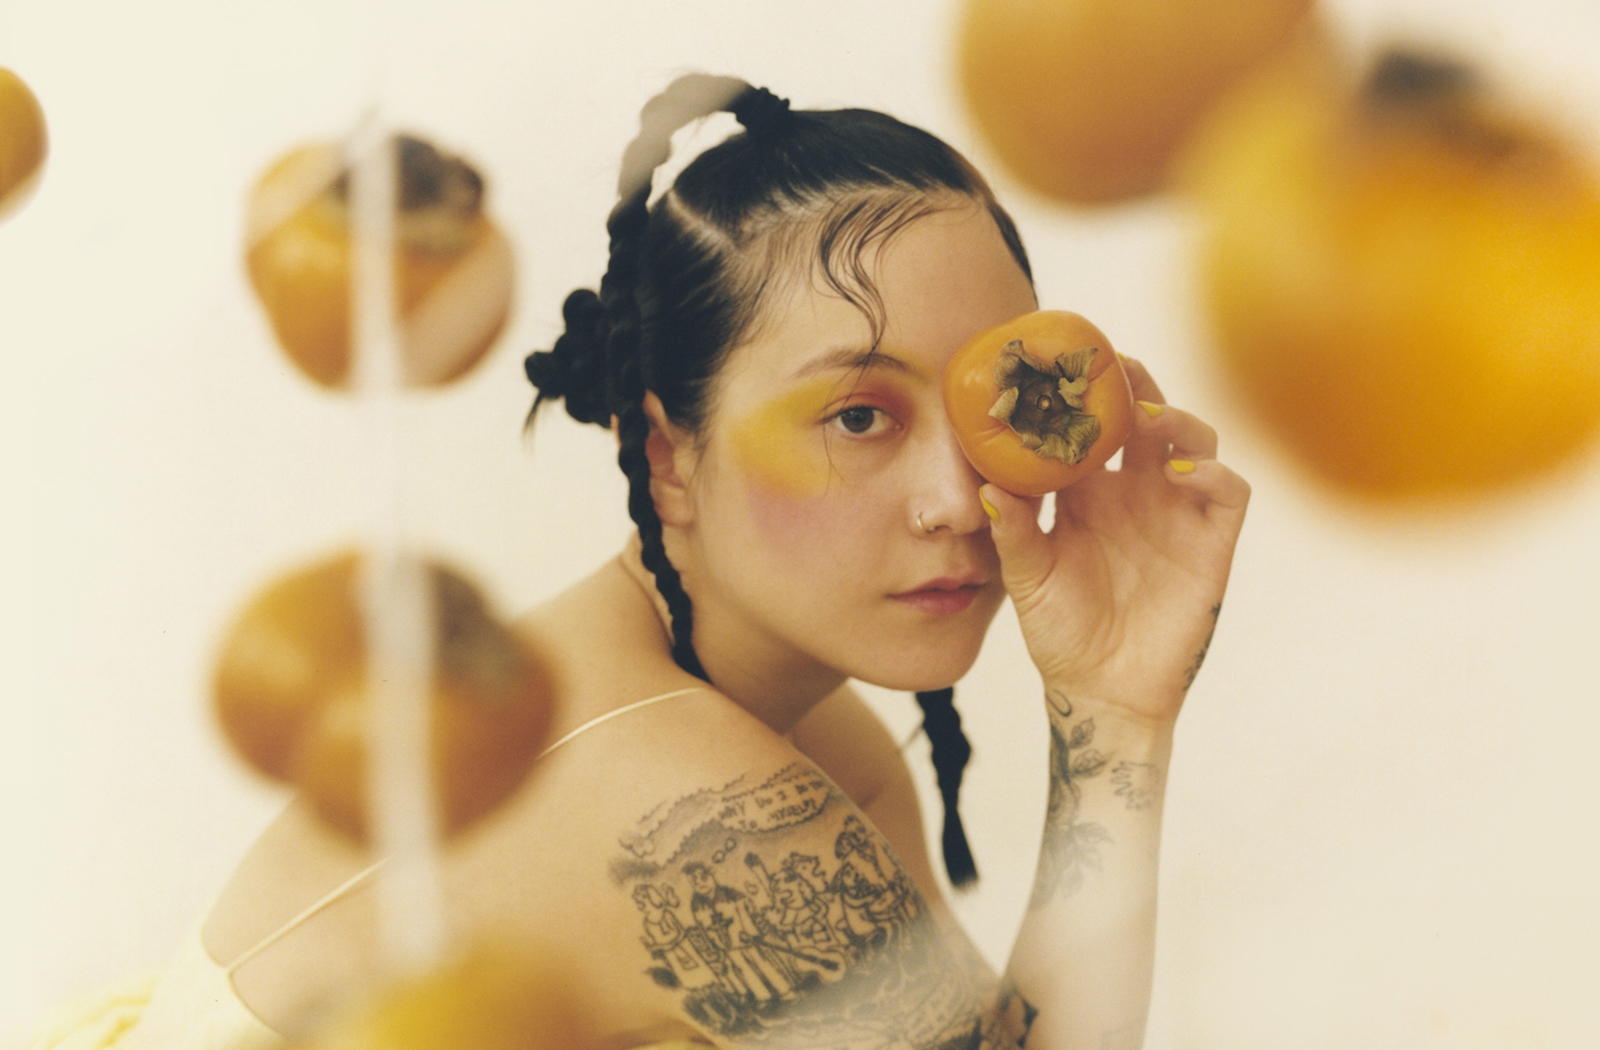 Michelle Zauner looks over her shoulder, covering one eye with a golden persimmon. She wears golden eye makeup and styled hair braids. Persimmons float around her out of focus.